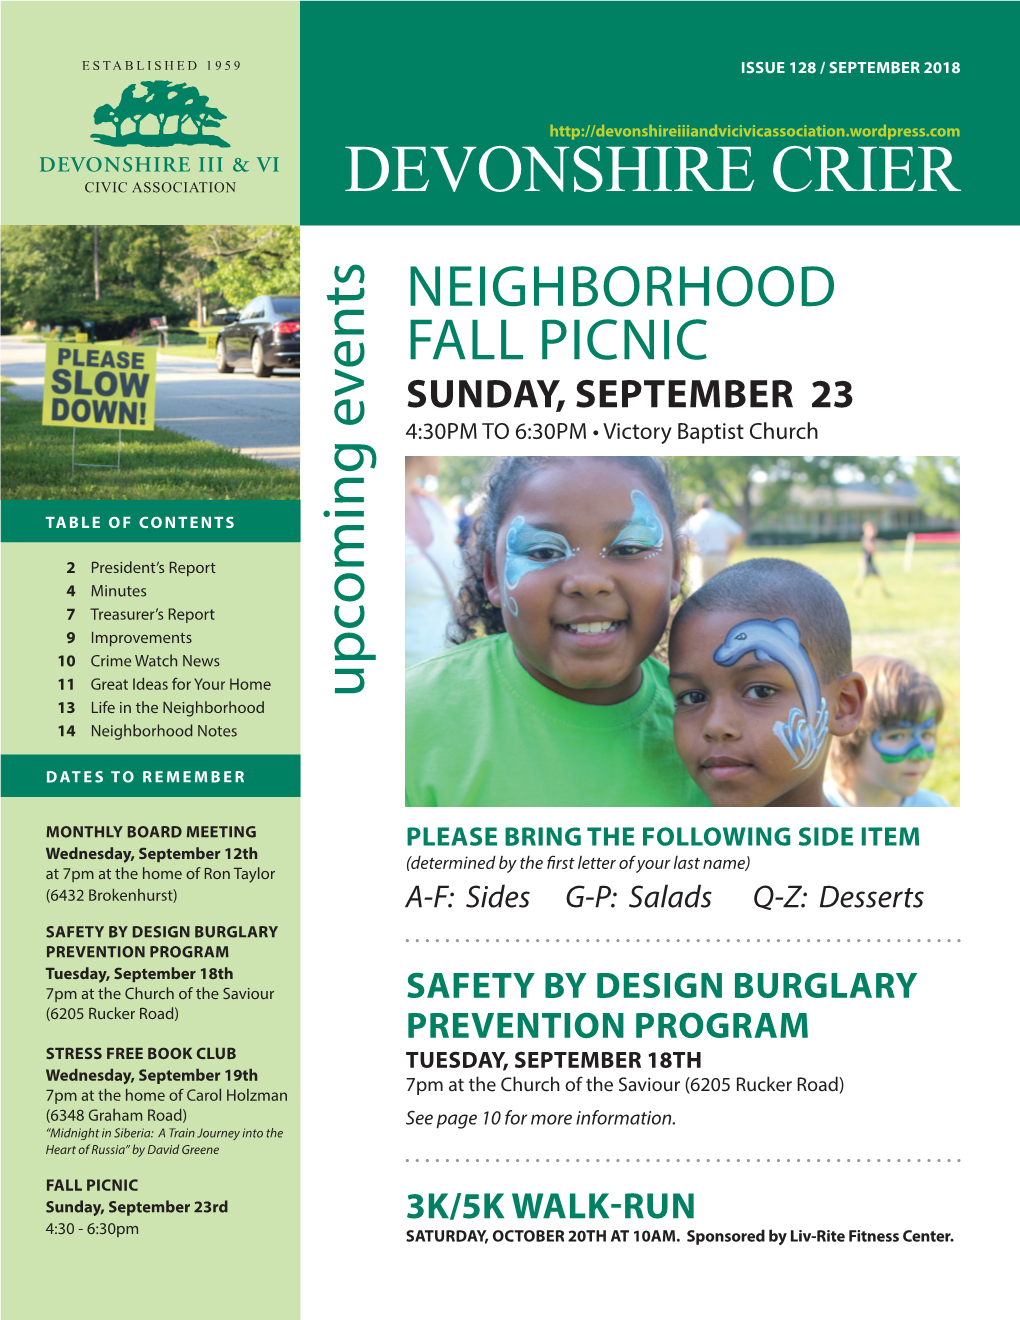 DEVONSHIRE CRIER NEIGHBORHOOD FALL PICNIC SUNDAY, SEPTEMBER 23 4:30PM to 6:30PM • Victory Baptist Church